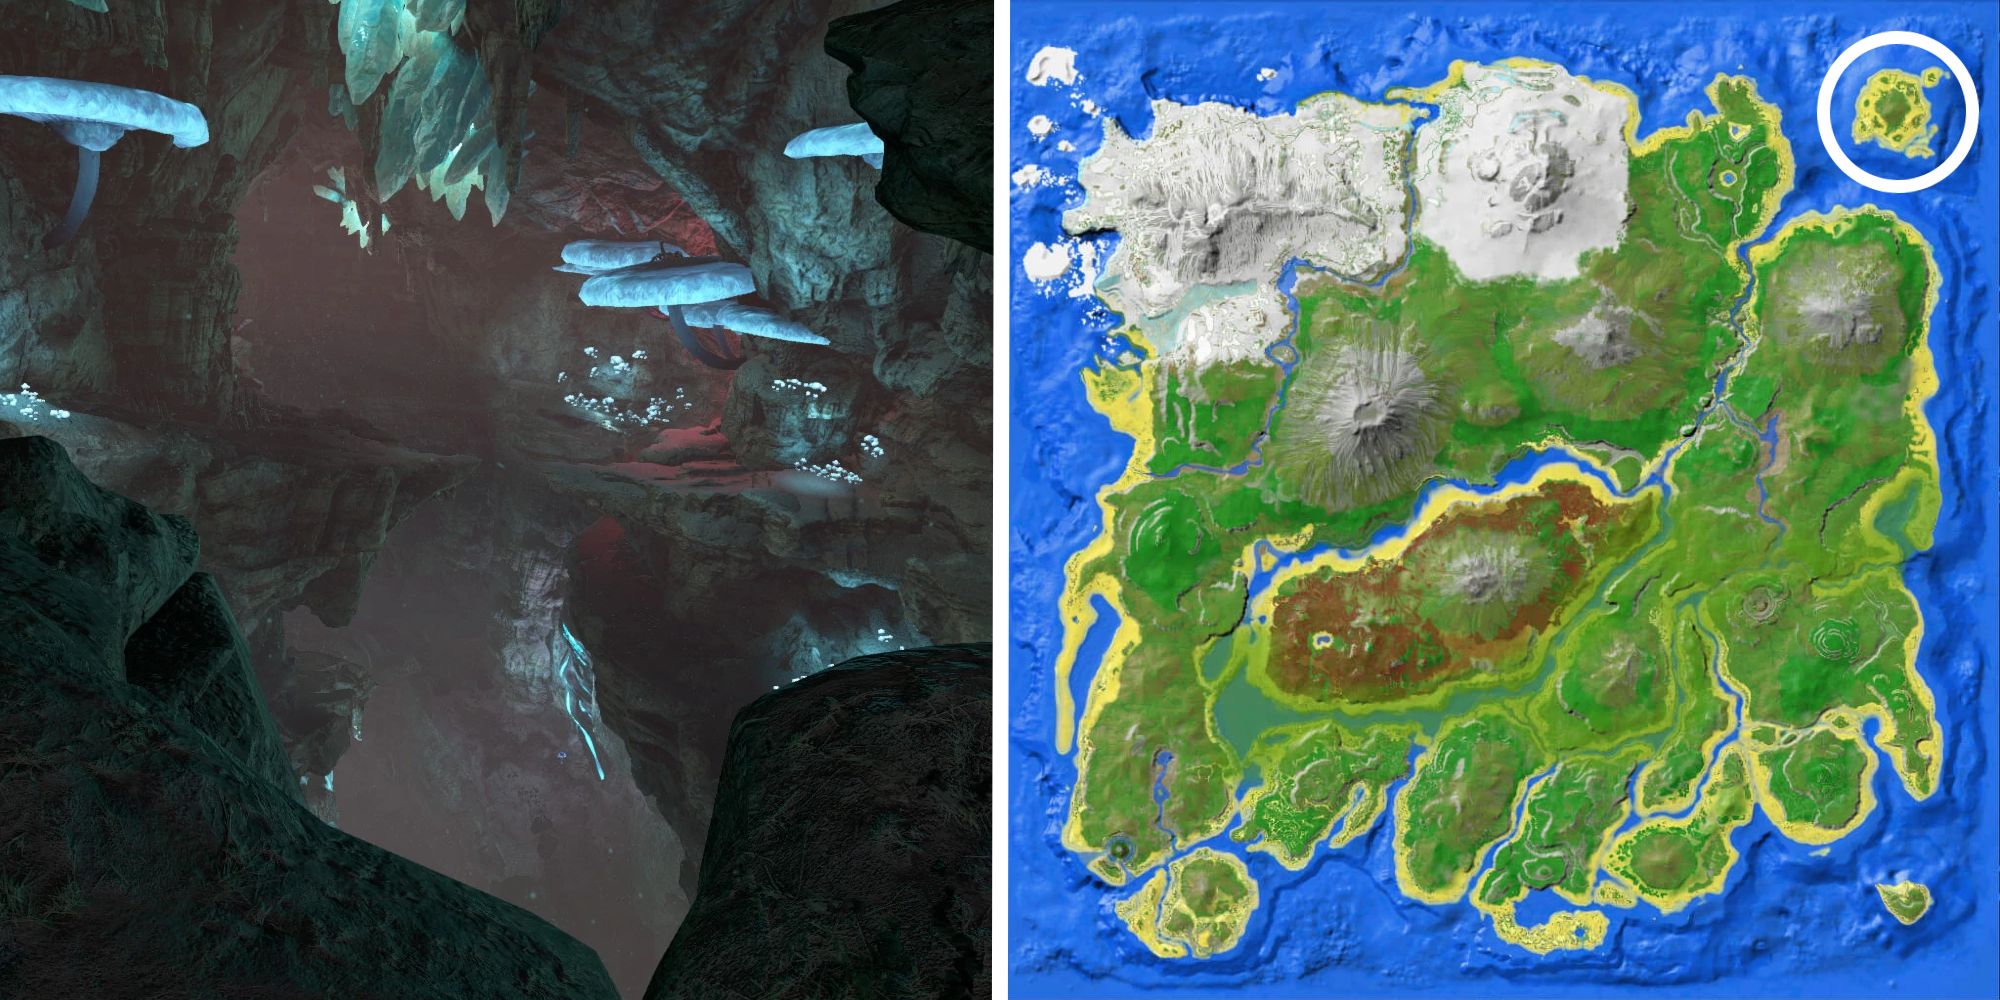 image of north east cave next to image of location on map